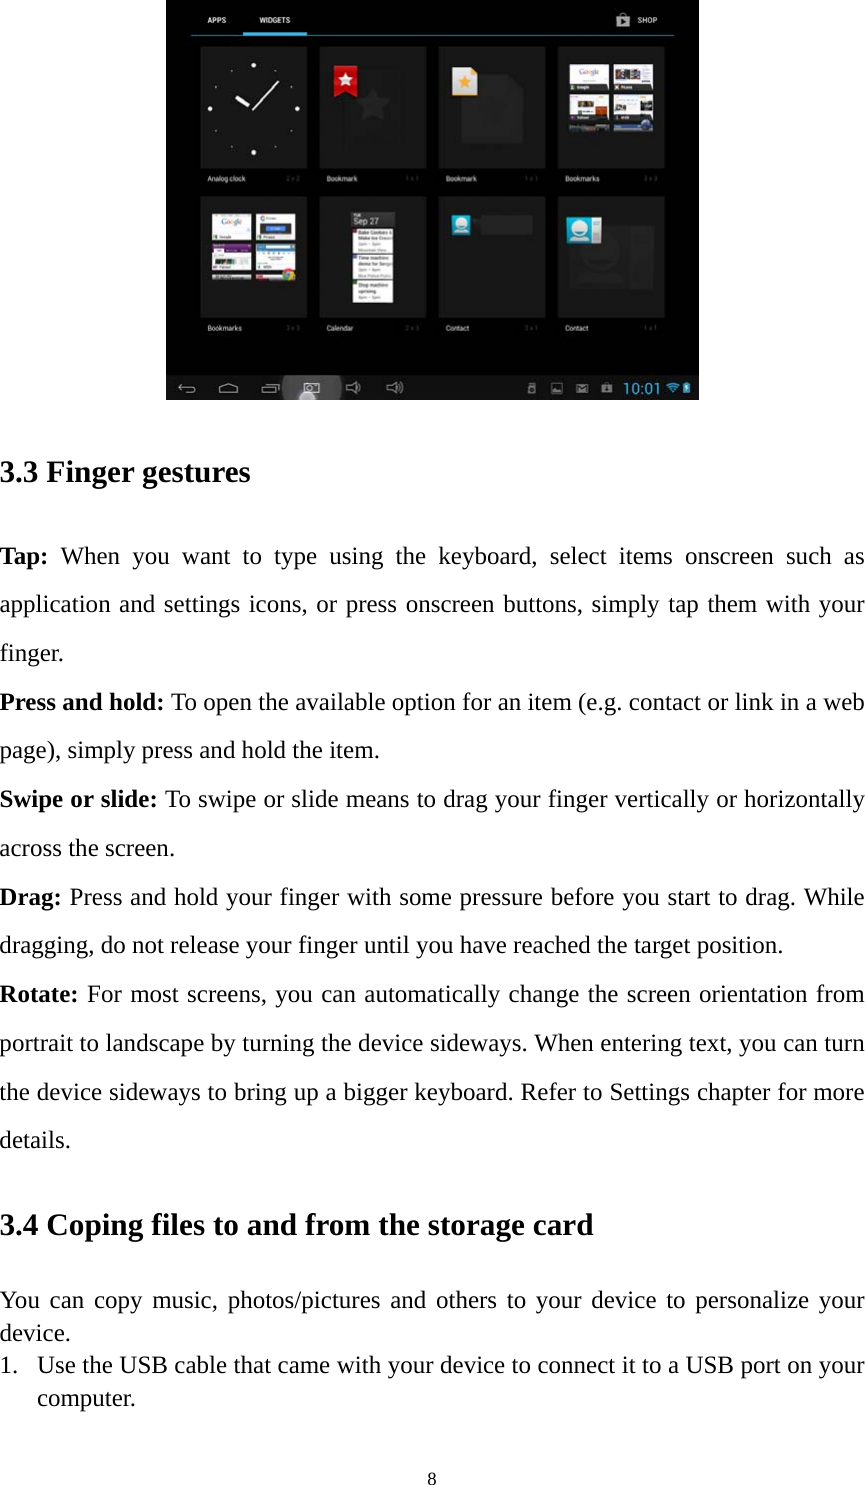 8  3.3 Finger gestures Tap: When you want to type using the keyboard, select items onscreen such as application and settings icons, or press onscreen buttons, simply tap them with your finger. Press and hold: To open the available option for an item (e.g. contact or link in a web page), simply press and hold the item. Swipe or slide: To swipe or slide means to drag your finger vertically or horizontally across the screen.   Drag: Press and hold your finger with some pressure before you start to drag. While dragging, do not release your finger until you have reached the target position. Rotate: For most screens, you can automatically change the screen orientation from portrait to landscape by turning the device sideways. When entering text, you can turn the device sideways to bring up a bigger keyboard. Refer to Settings chapter for more details.  3.4 Coping files to and from the storage card You can copy music, photos/pictures and others to your device to personalize your device.  1. Use the USB cable that came with your device to connect it to a USB port on your computer.  